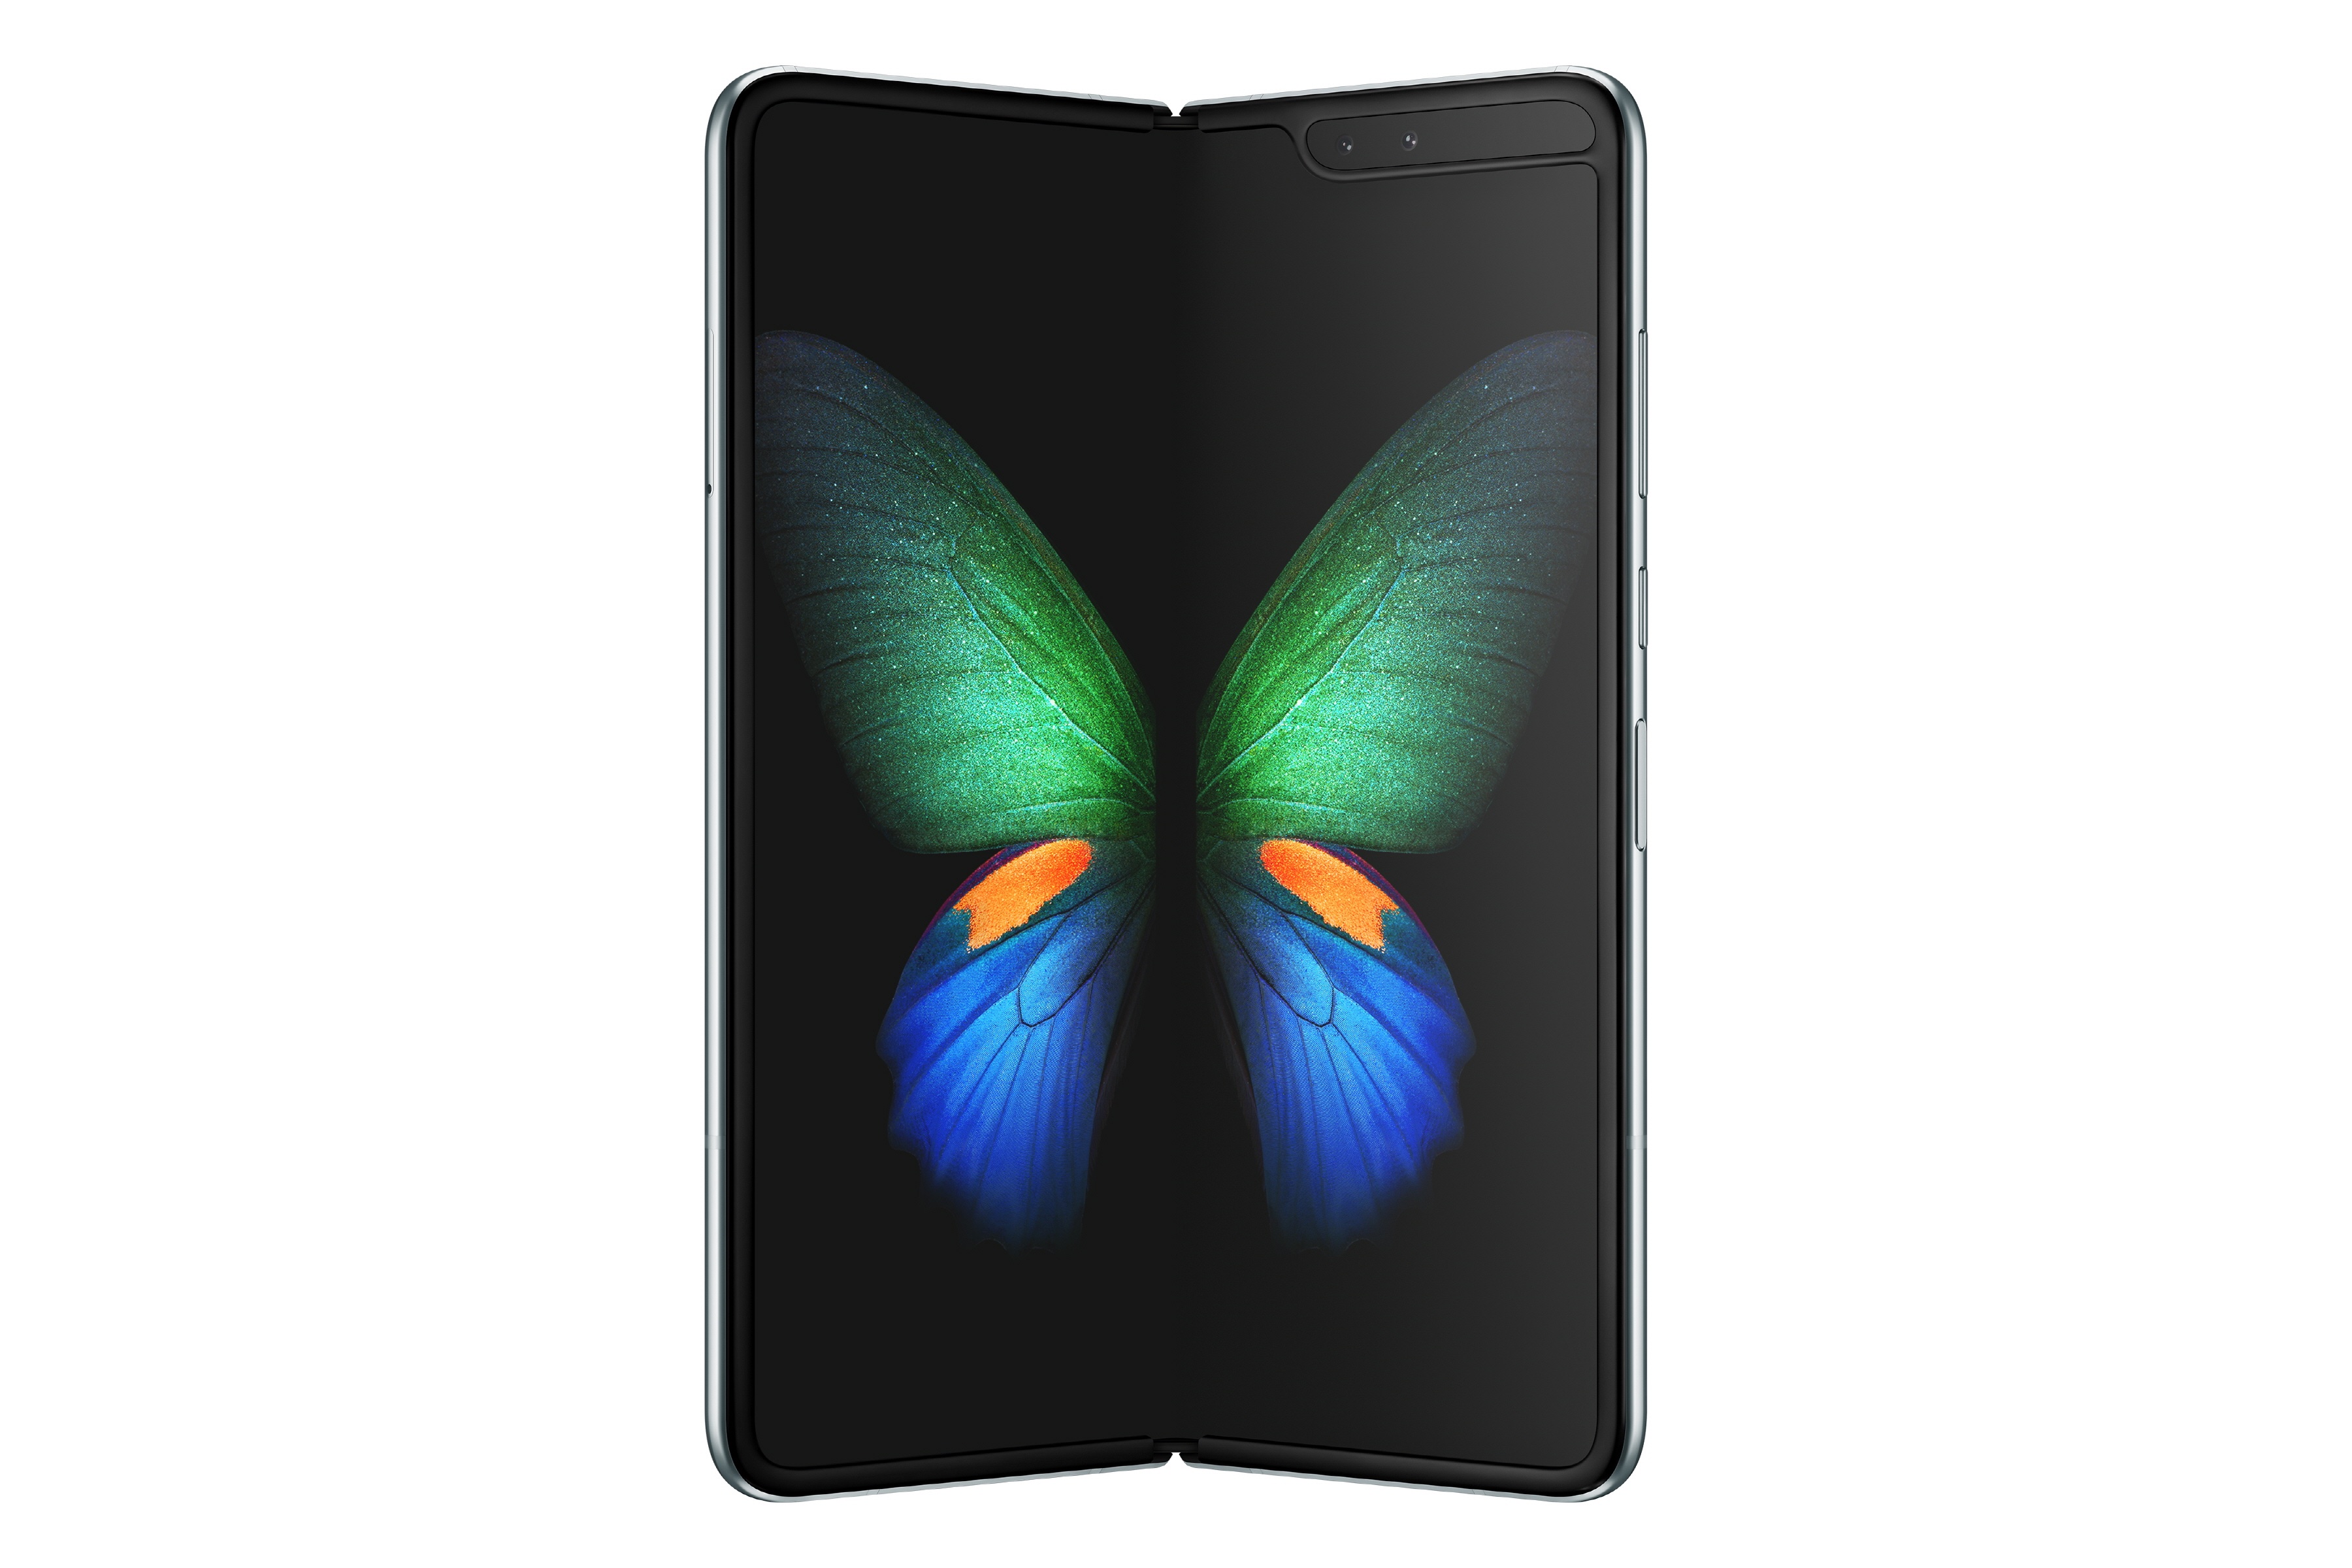 Samsung Electronics’ deferred Galaxy Fold presently ready for September launch